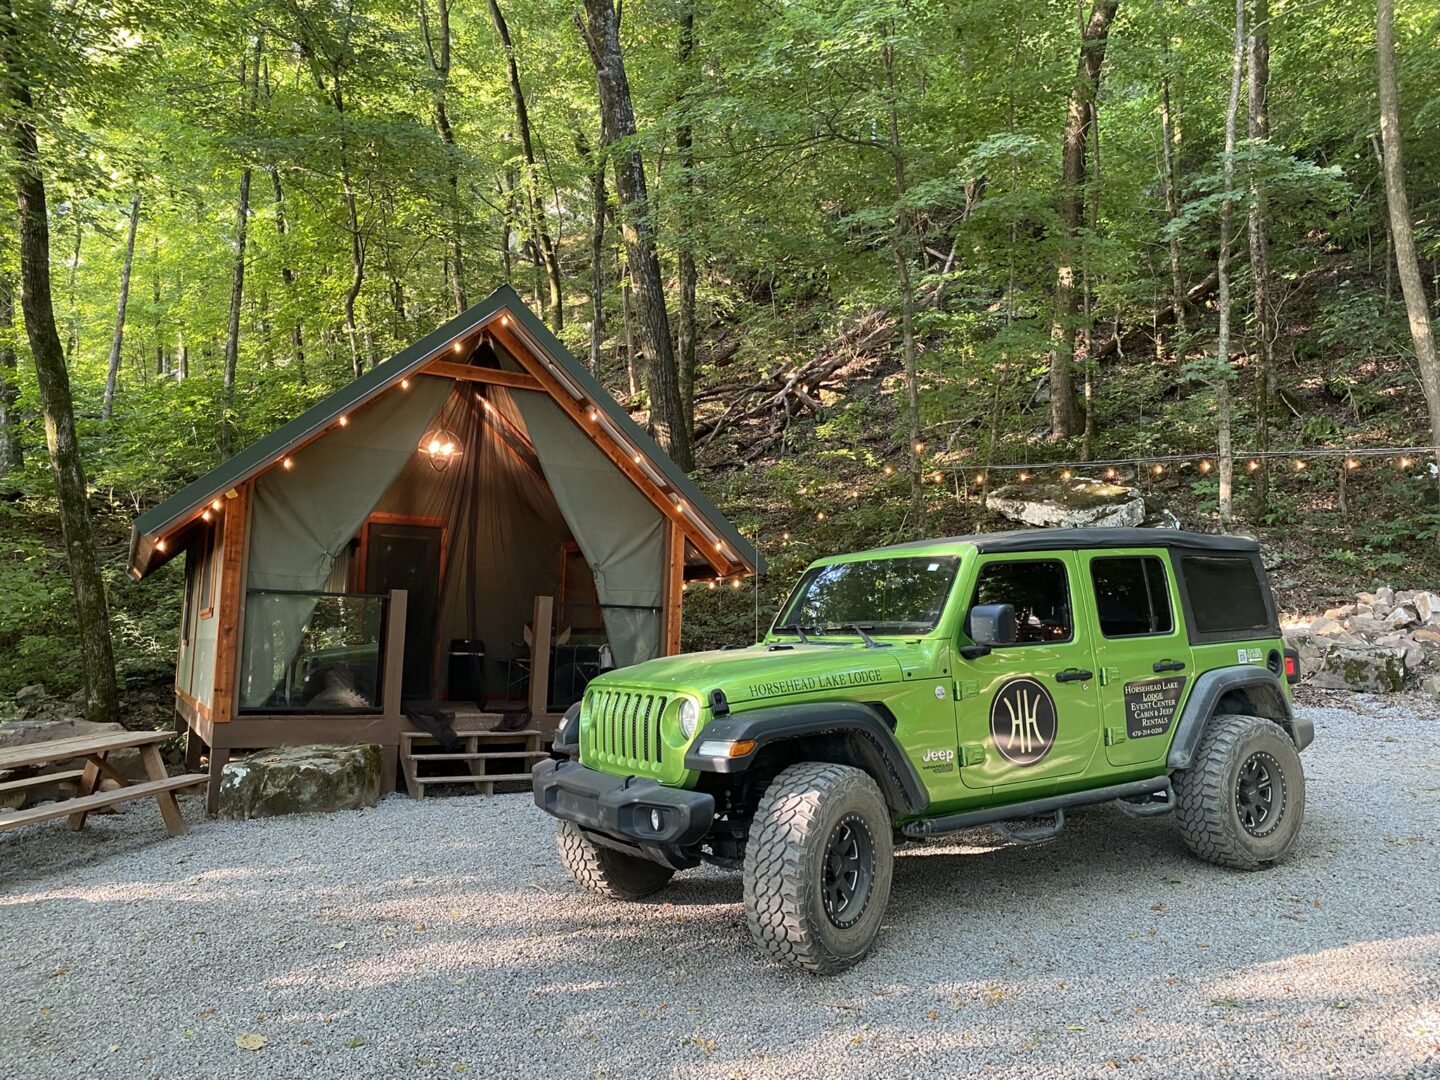 A jeep parked in front of a tent.